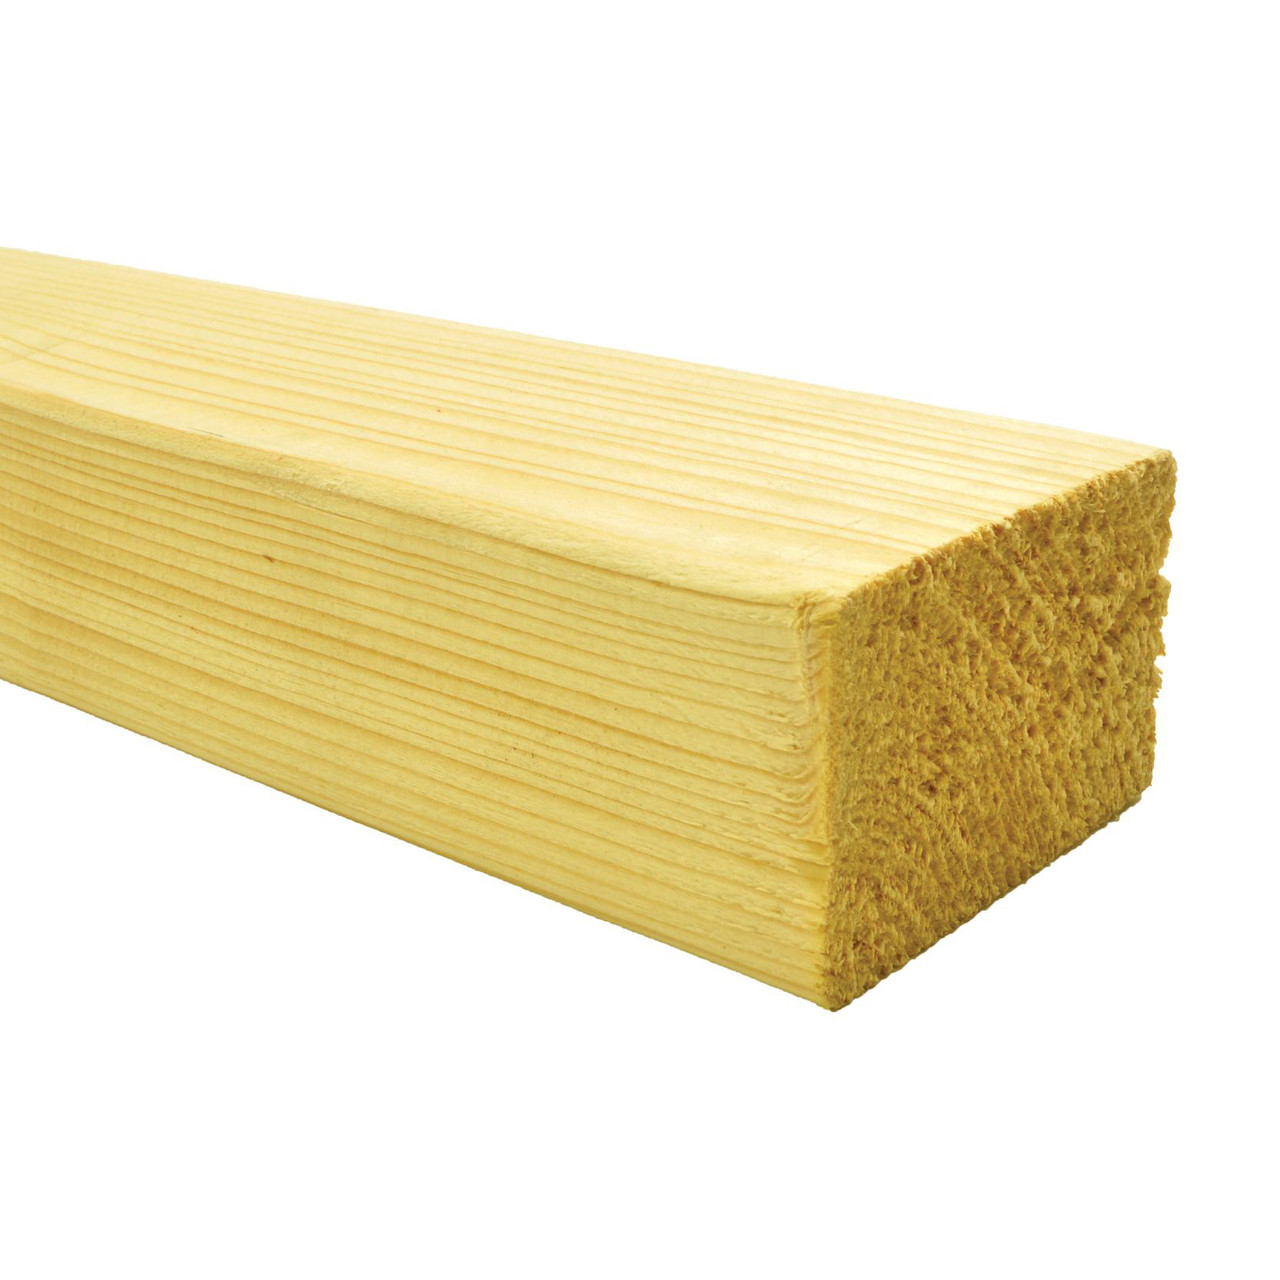 Photograph of Timber 50 x 100mm CLS